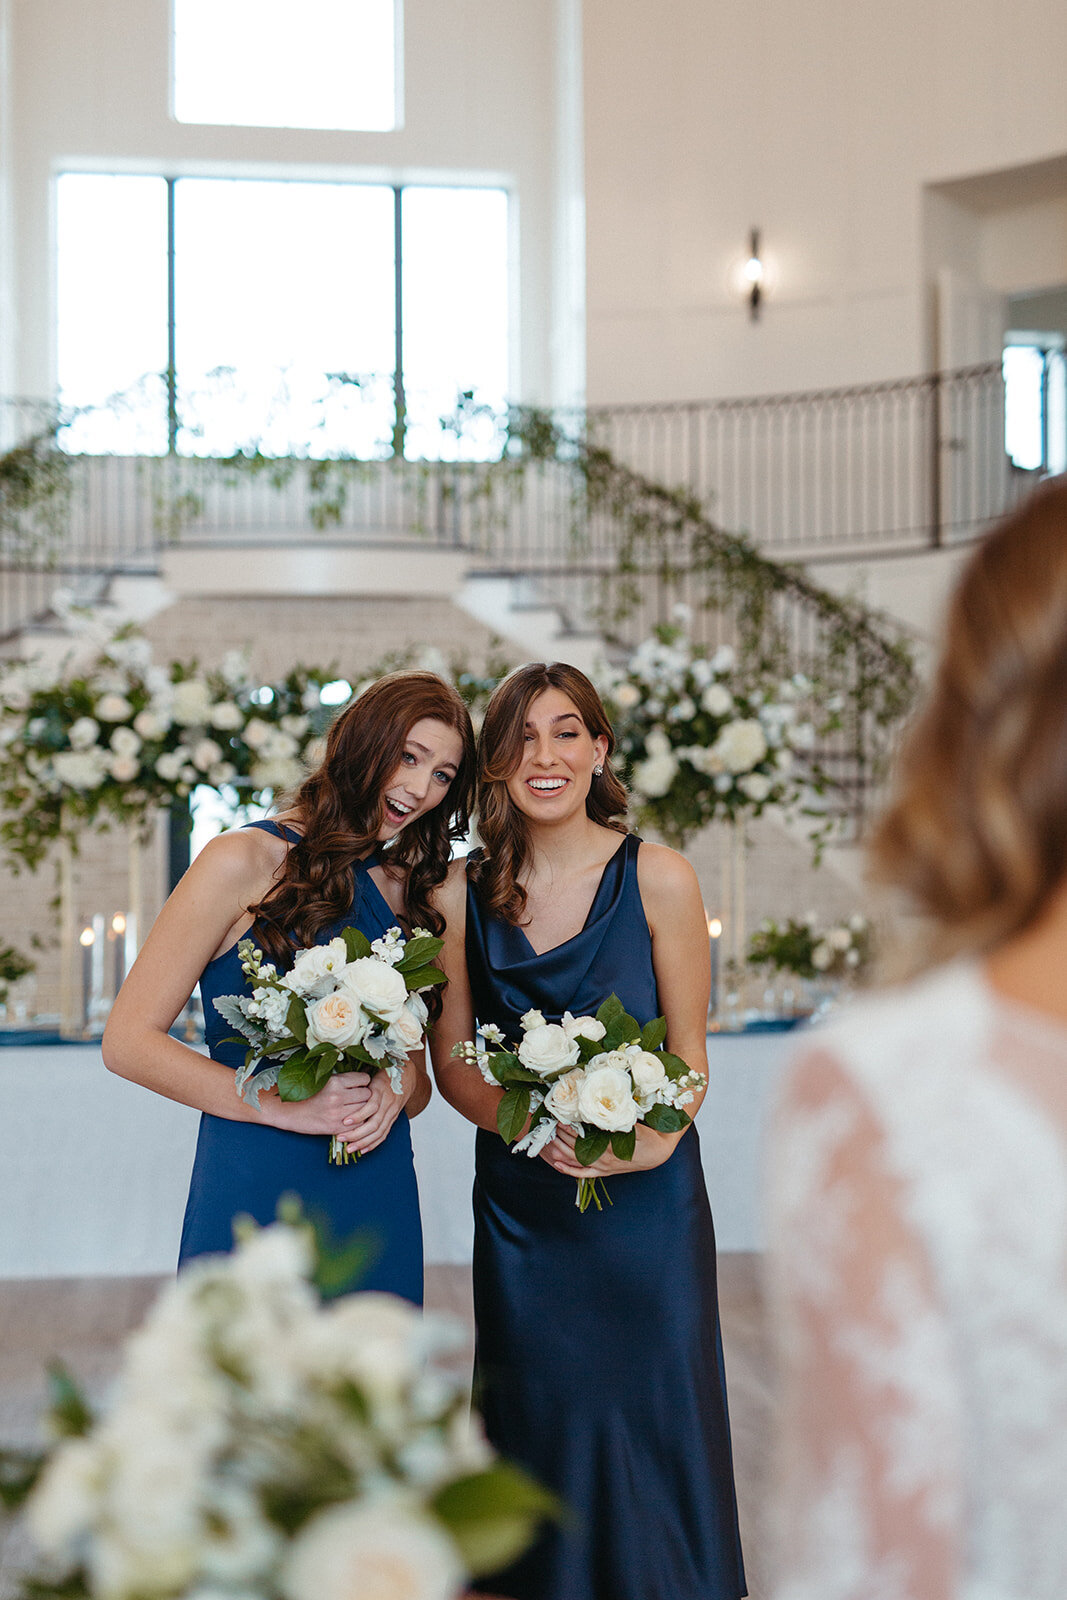 Two bridesmaids in blue satin gowns holding white bouquets smile in front of a table with tall white florals.